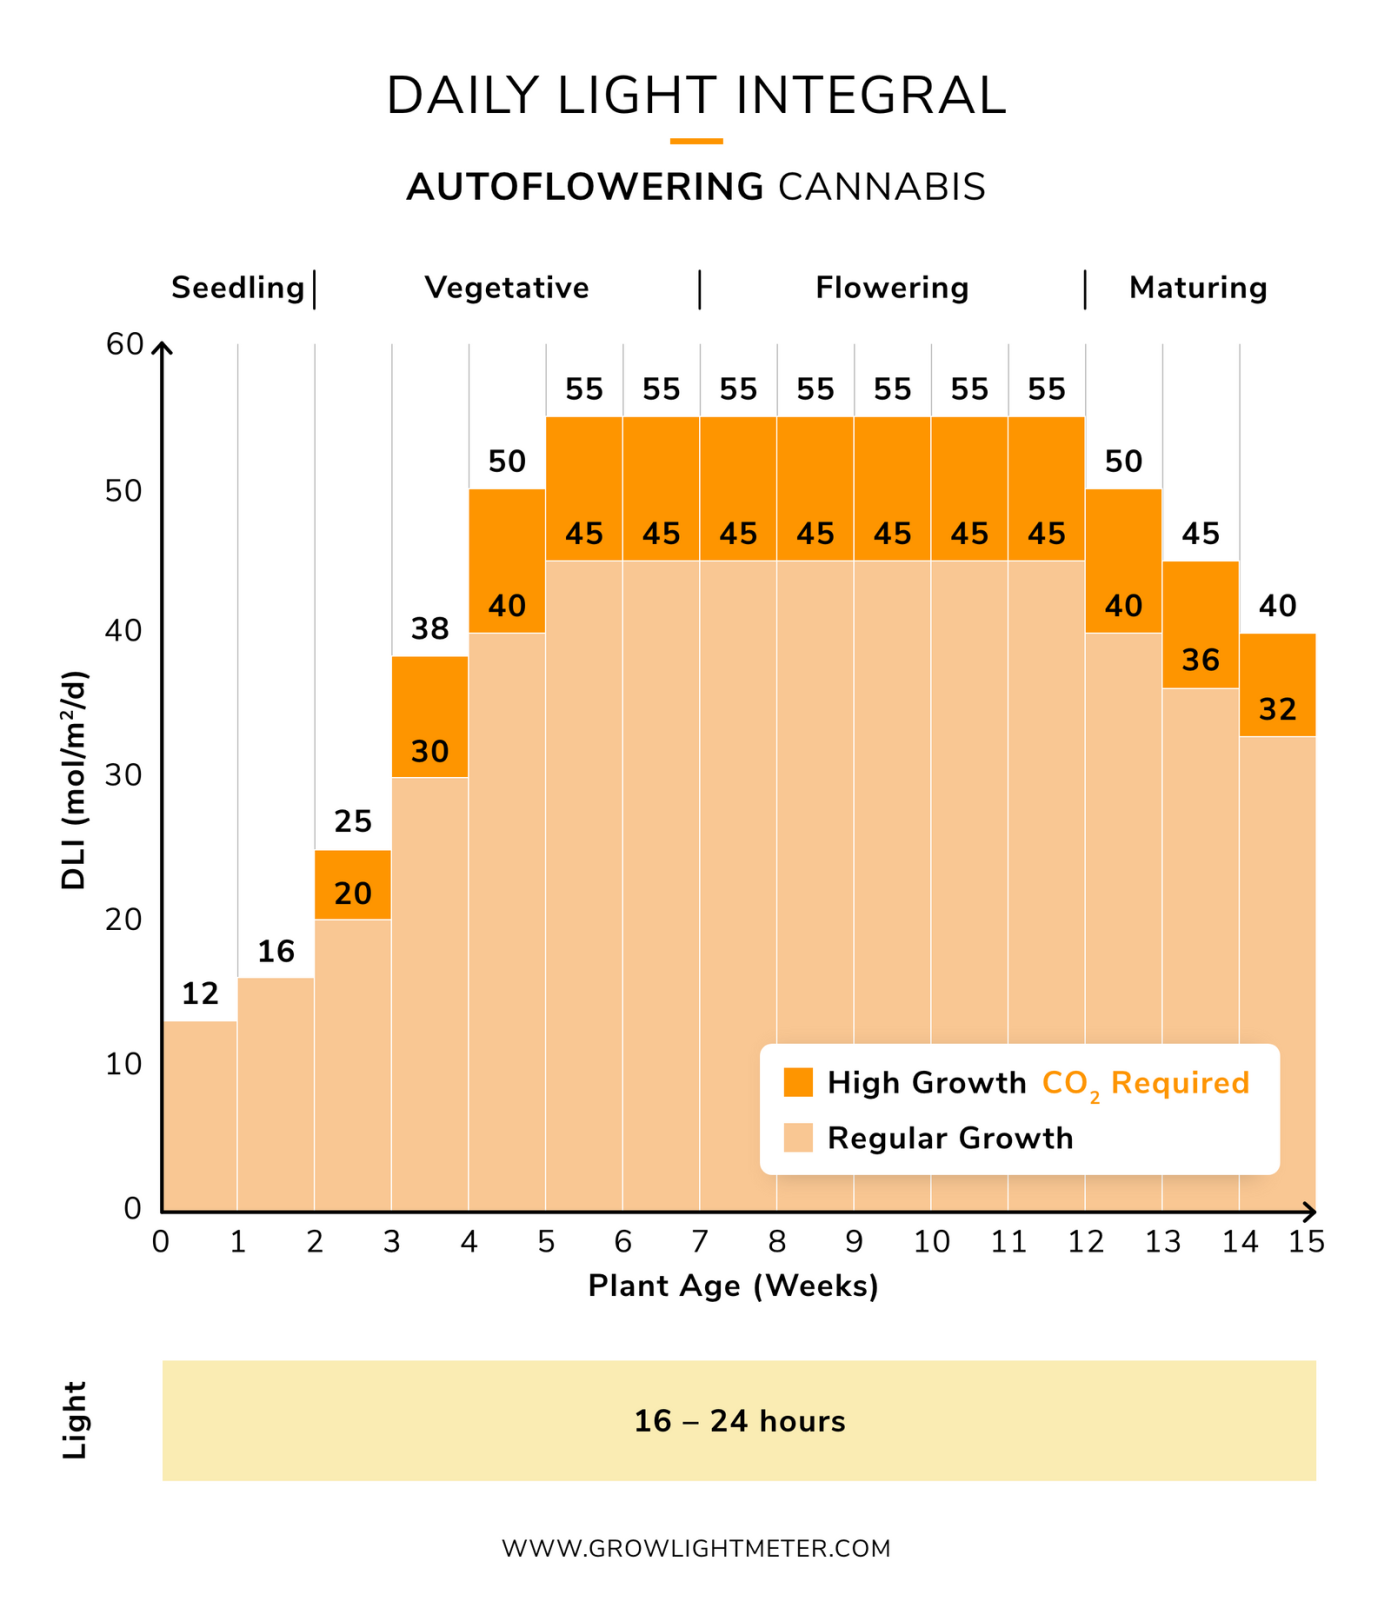 cannabis-dli-cycle-autos.png